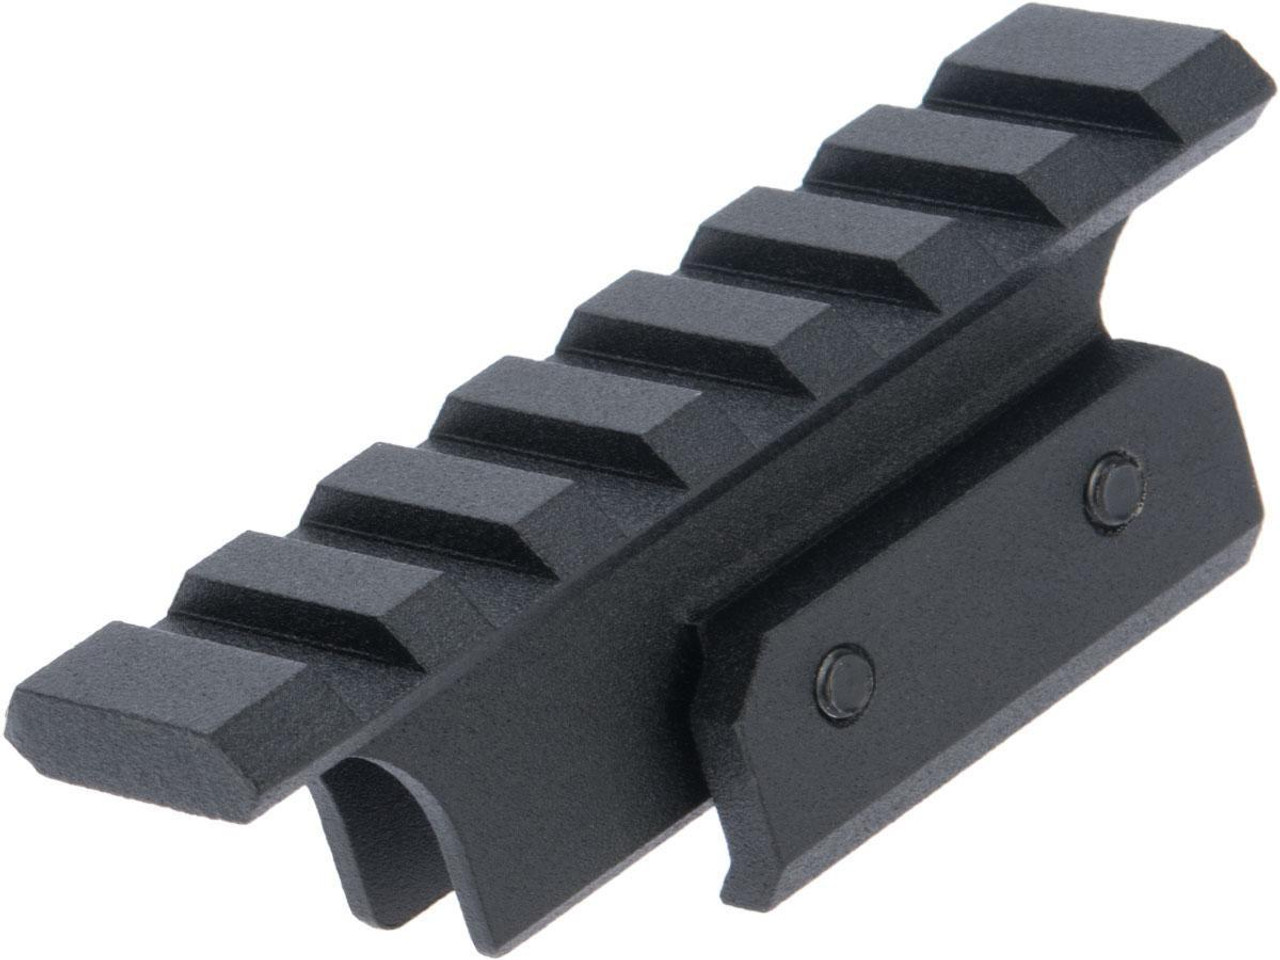 LCT Airsoft Z Series ZB-18 Rail for AKS74u Rear Sight